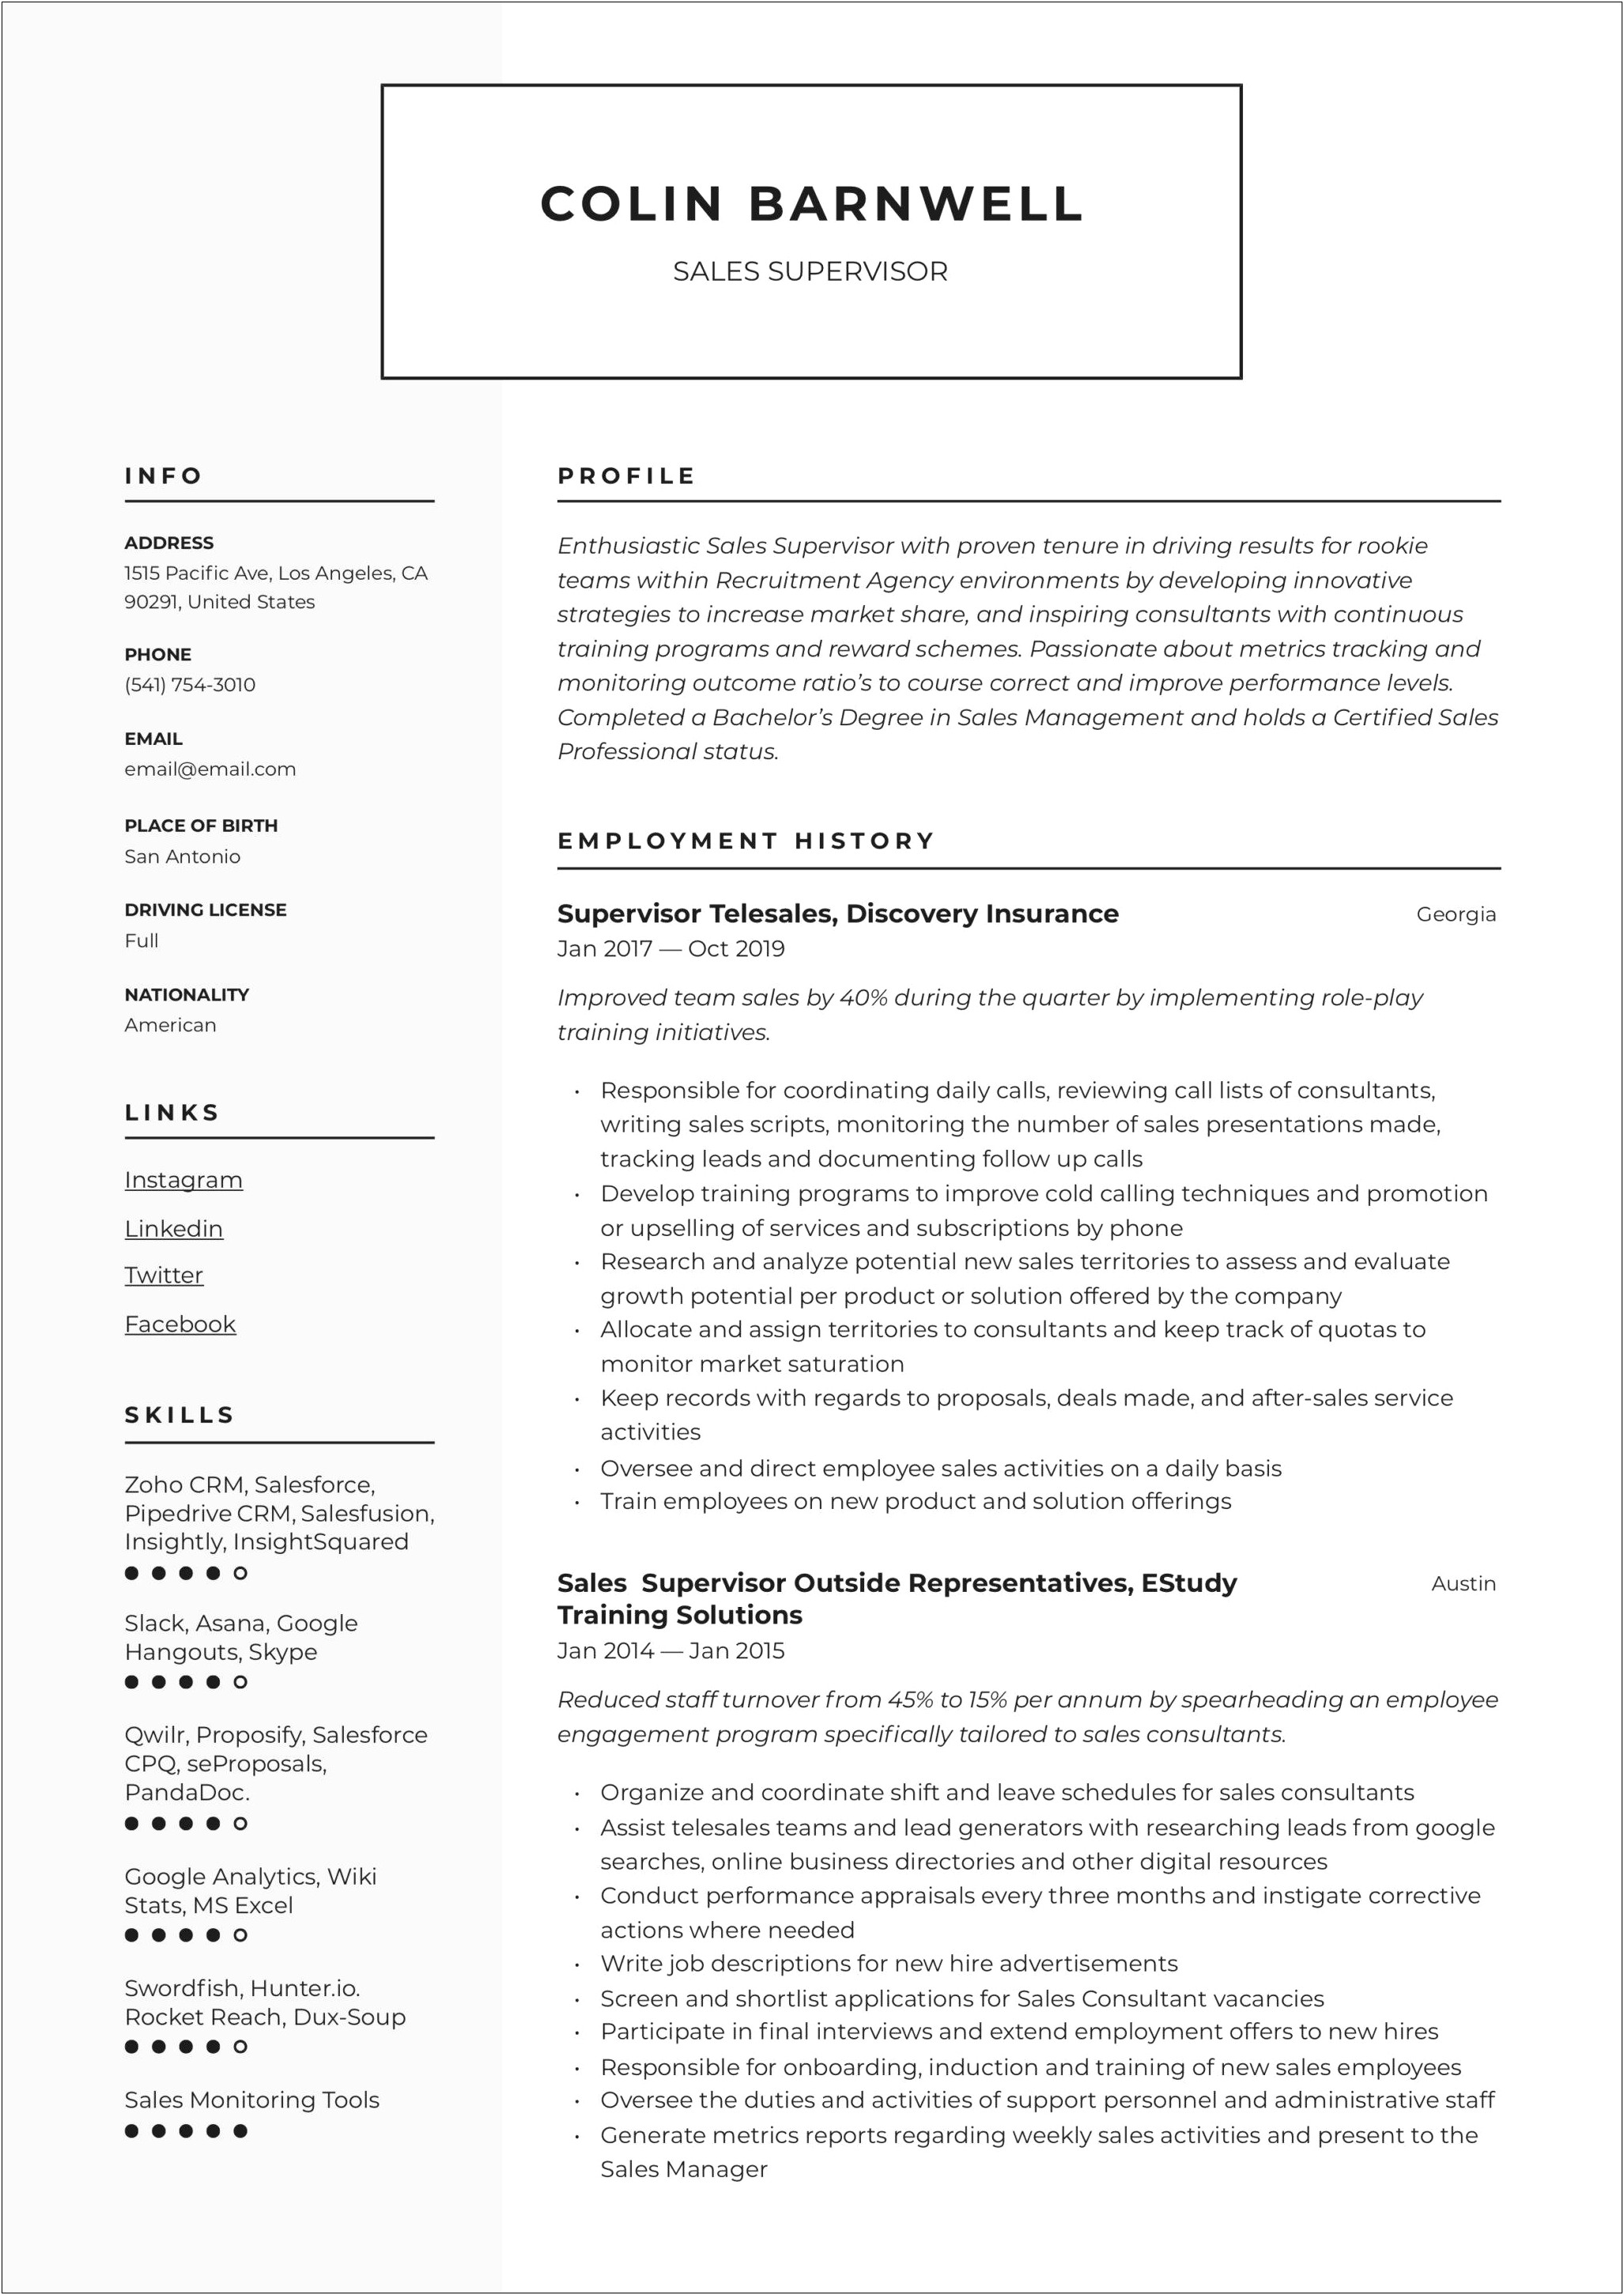 Working In Teams For Sales For Resume